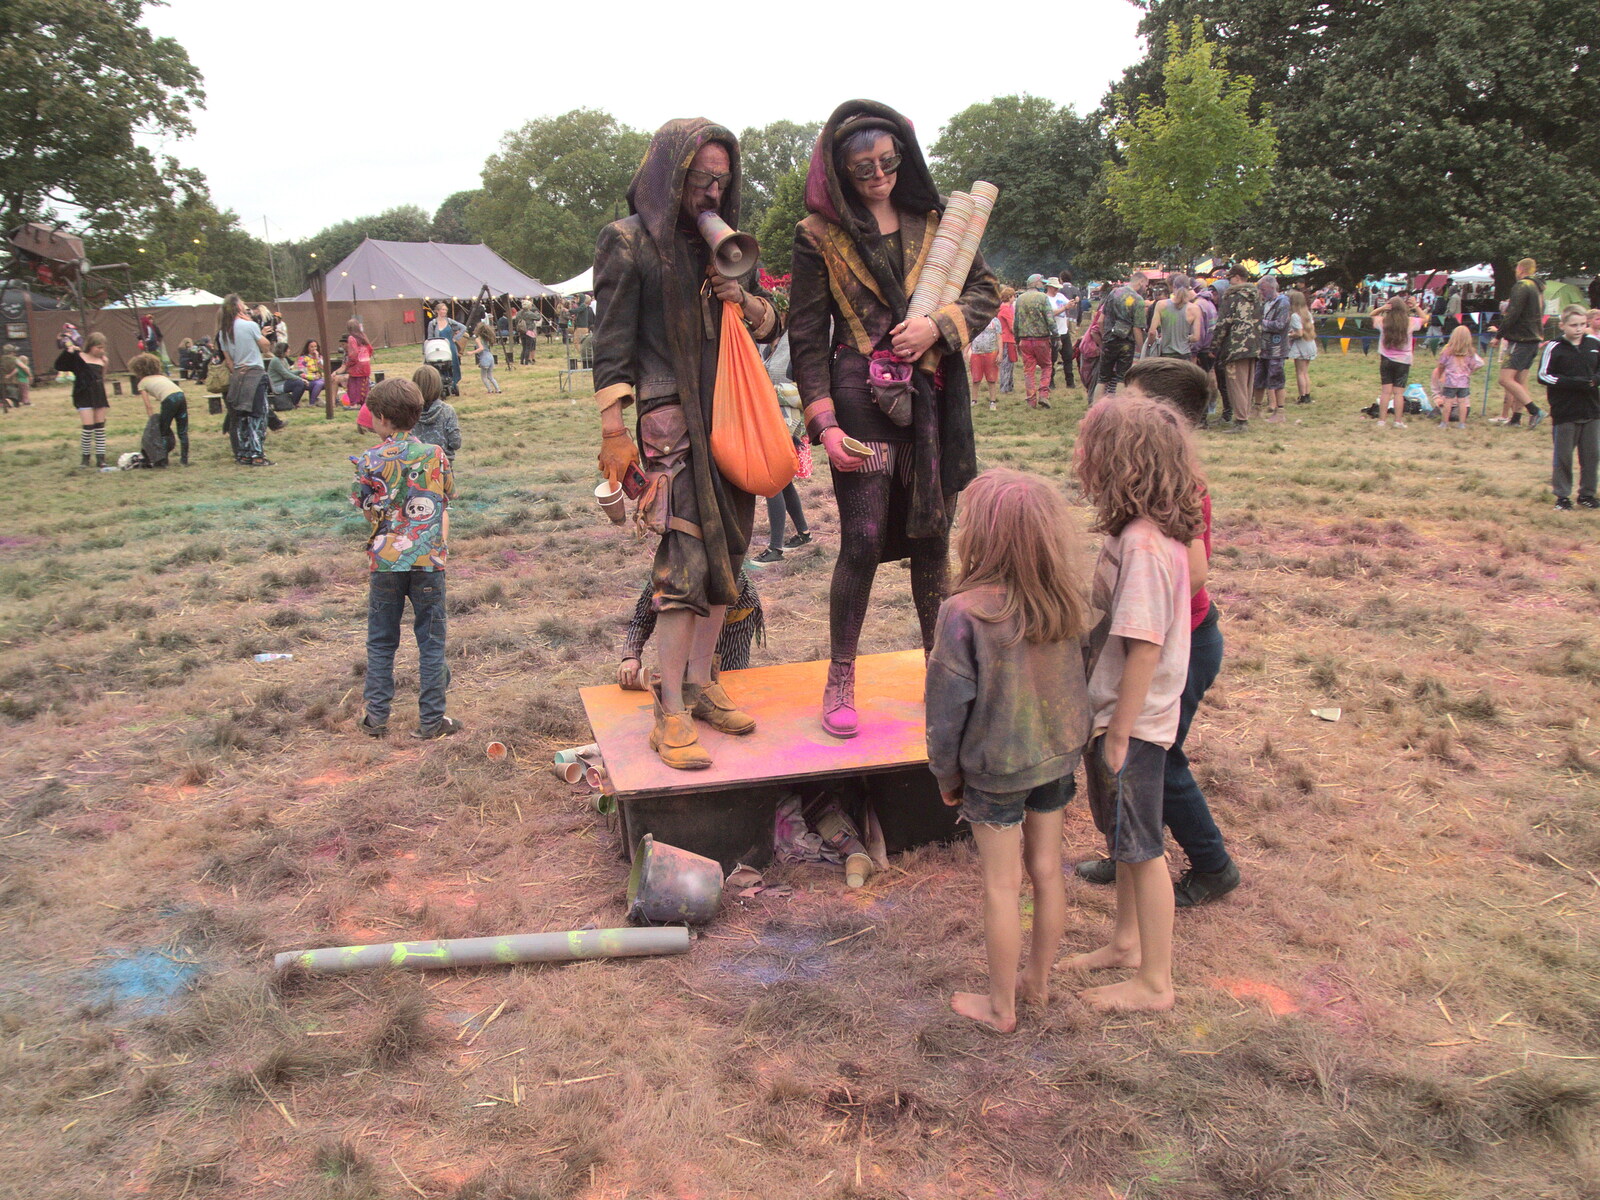 Some children ask if there's any more from Maui Waui Festival, Hill Farm, Gressenhall, Norfolk - 28th August 2021